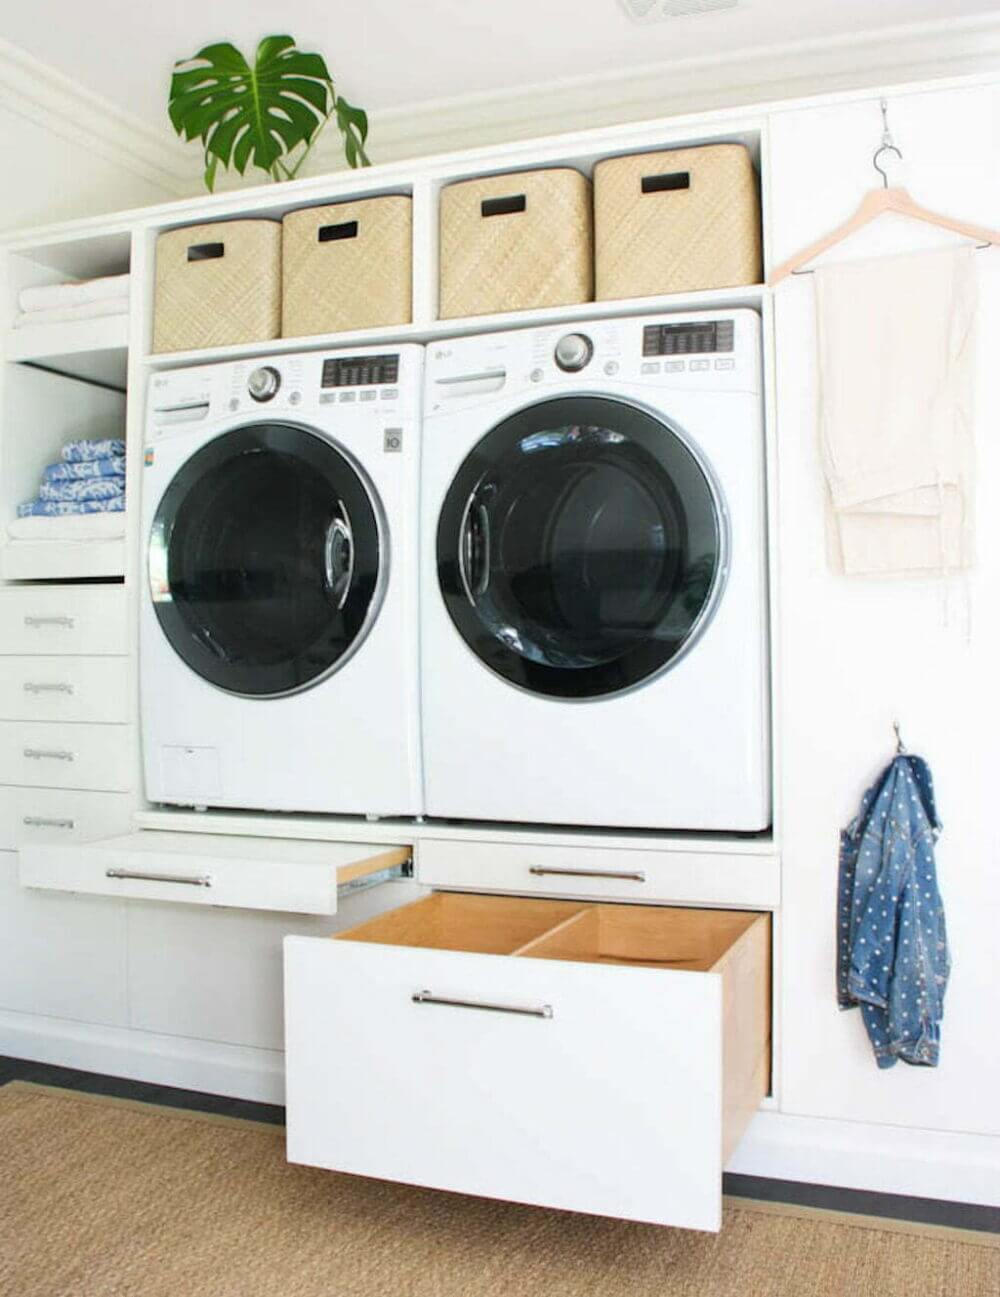 Laundry Cabinet Plans: Can You Make It? Yes, You Can! (Download)